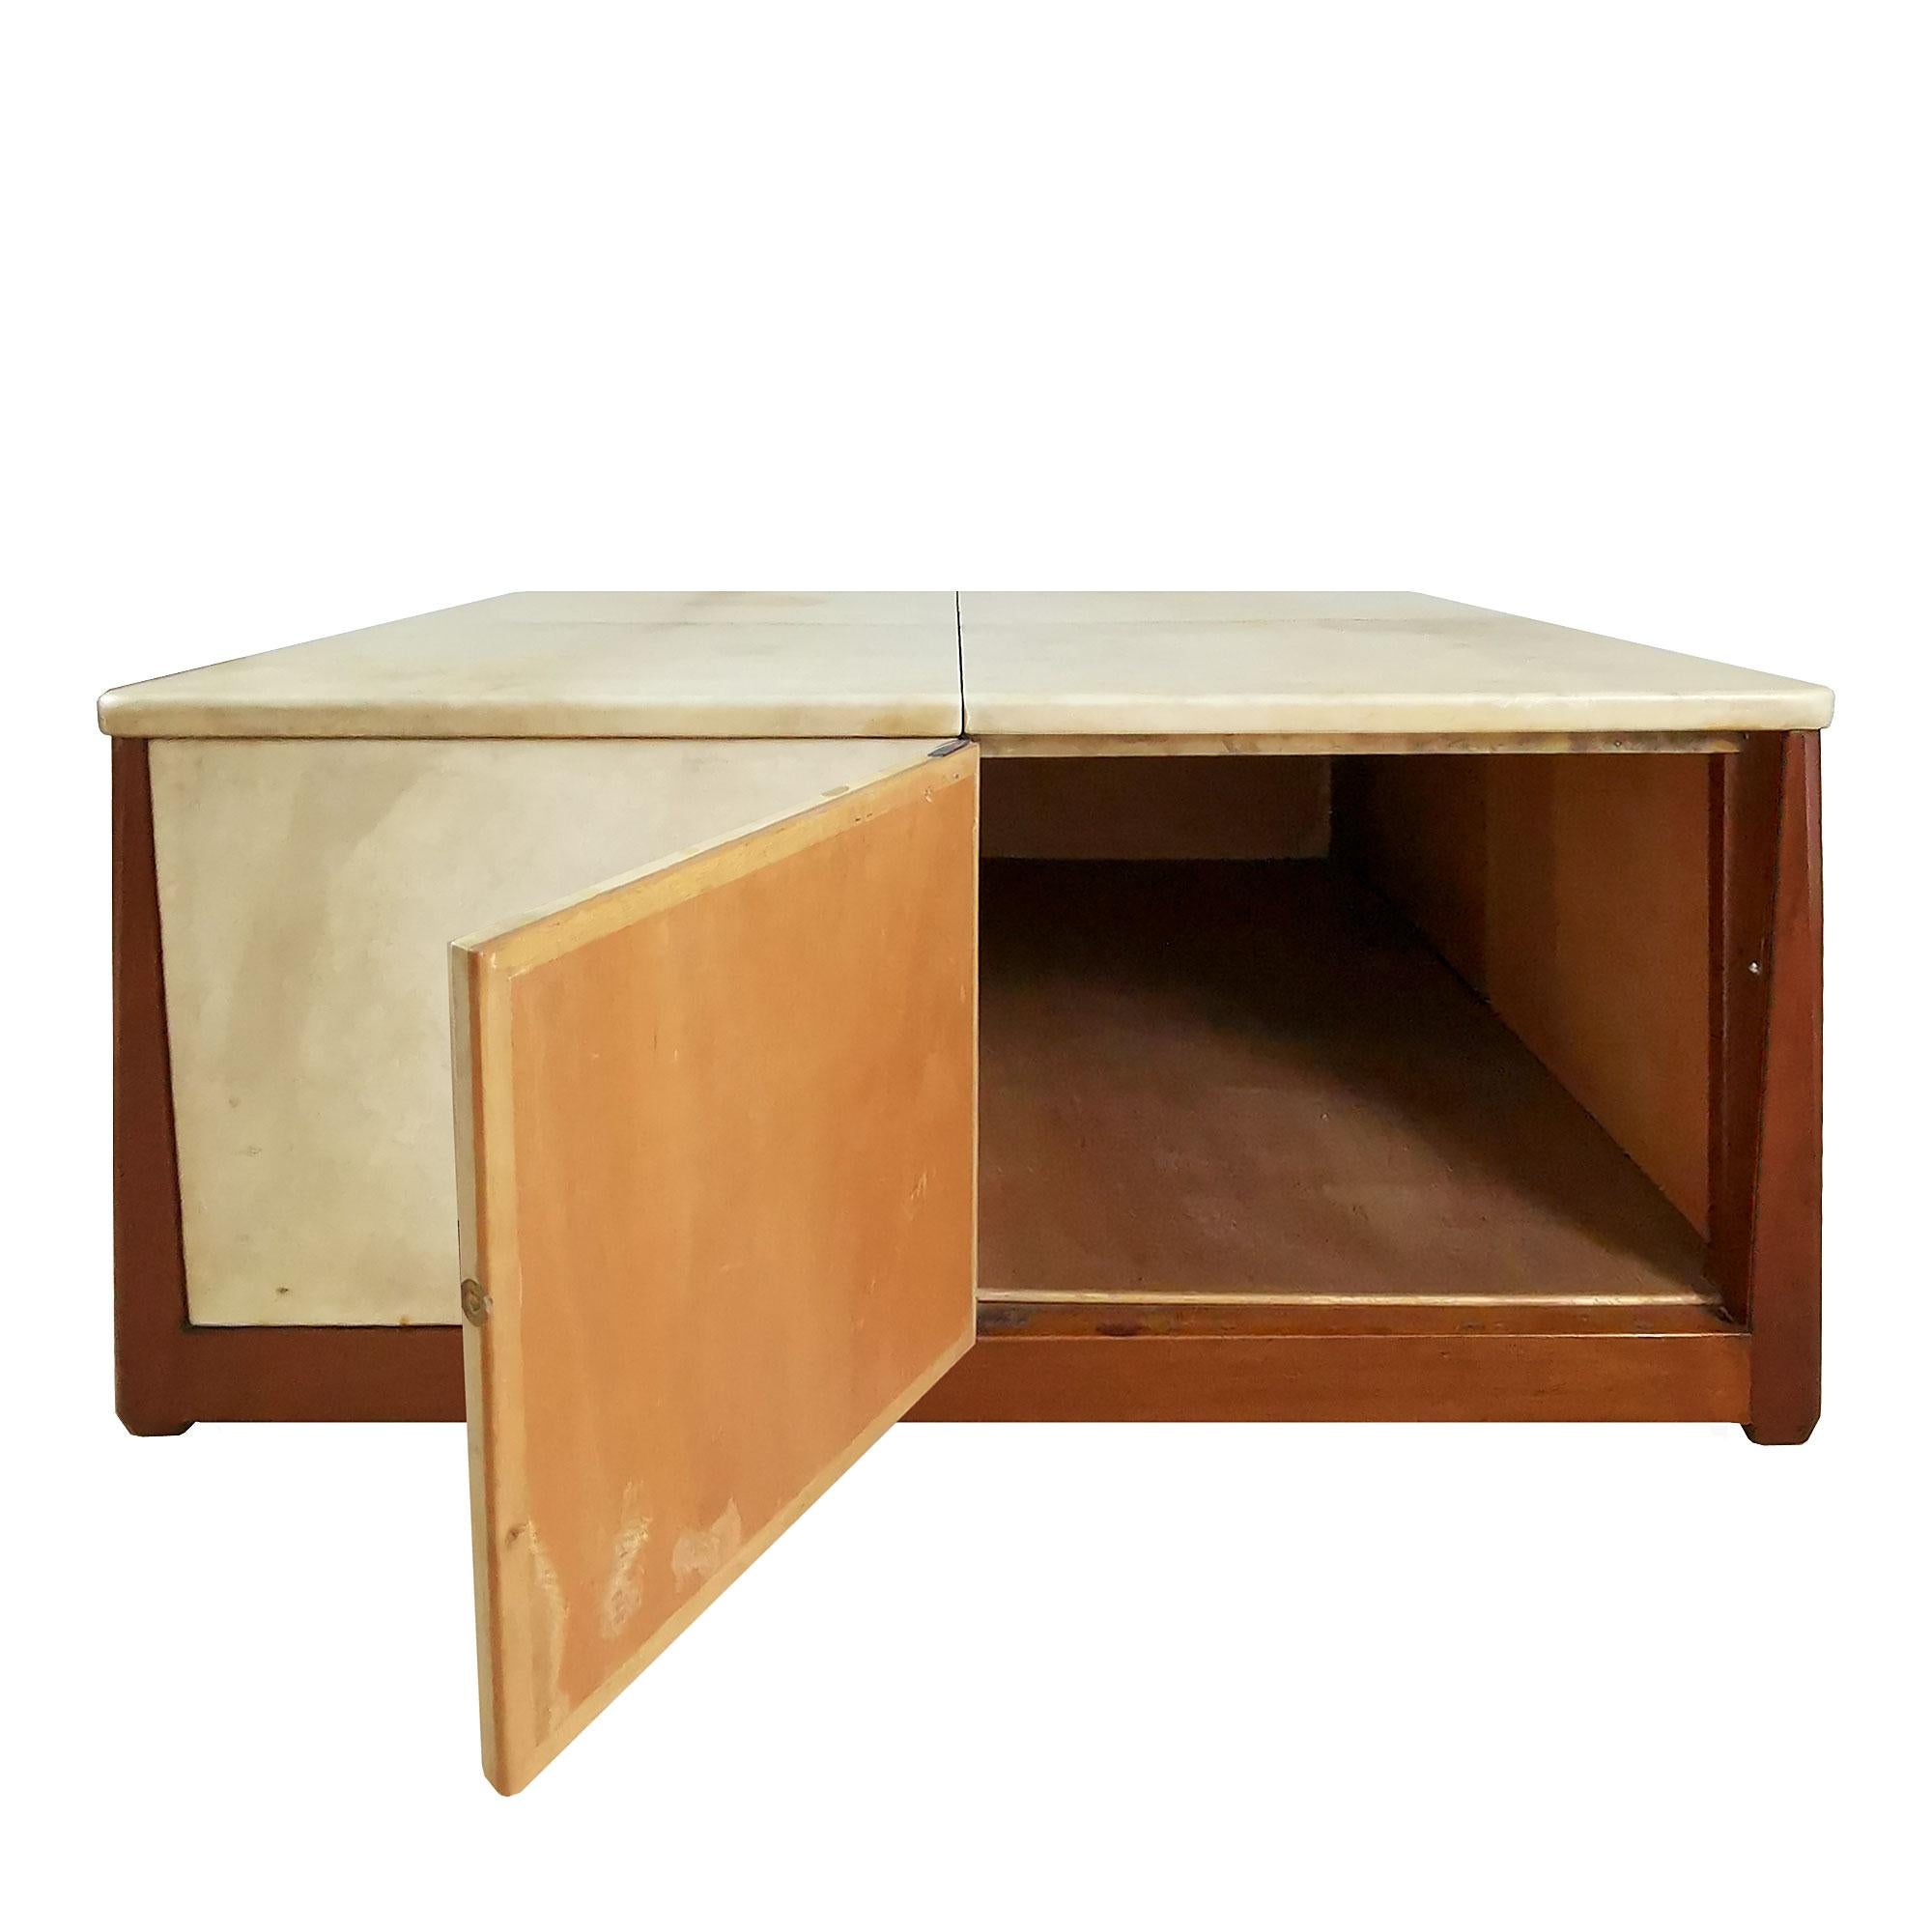 Large Square Mid-Century Modern Coffee Table by Pere Cosp, Mahogany - Barcelona For Sale 4